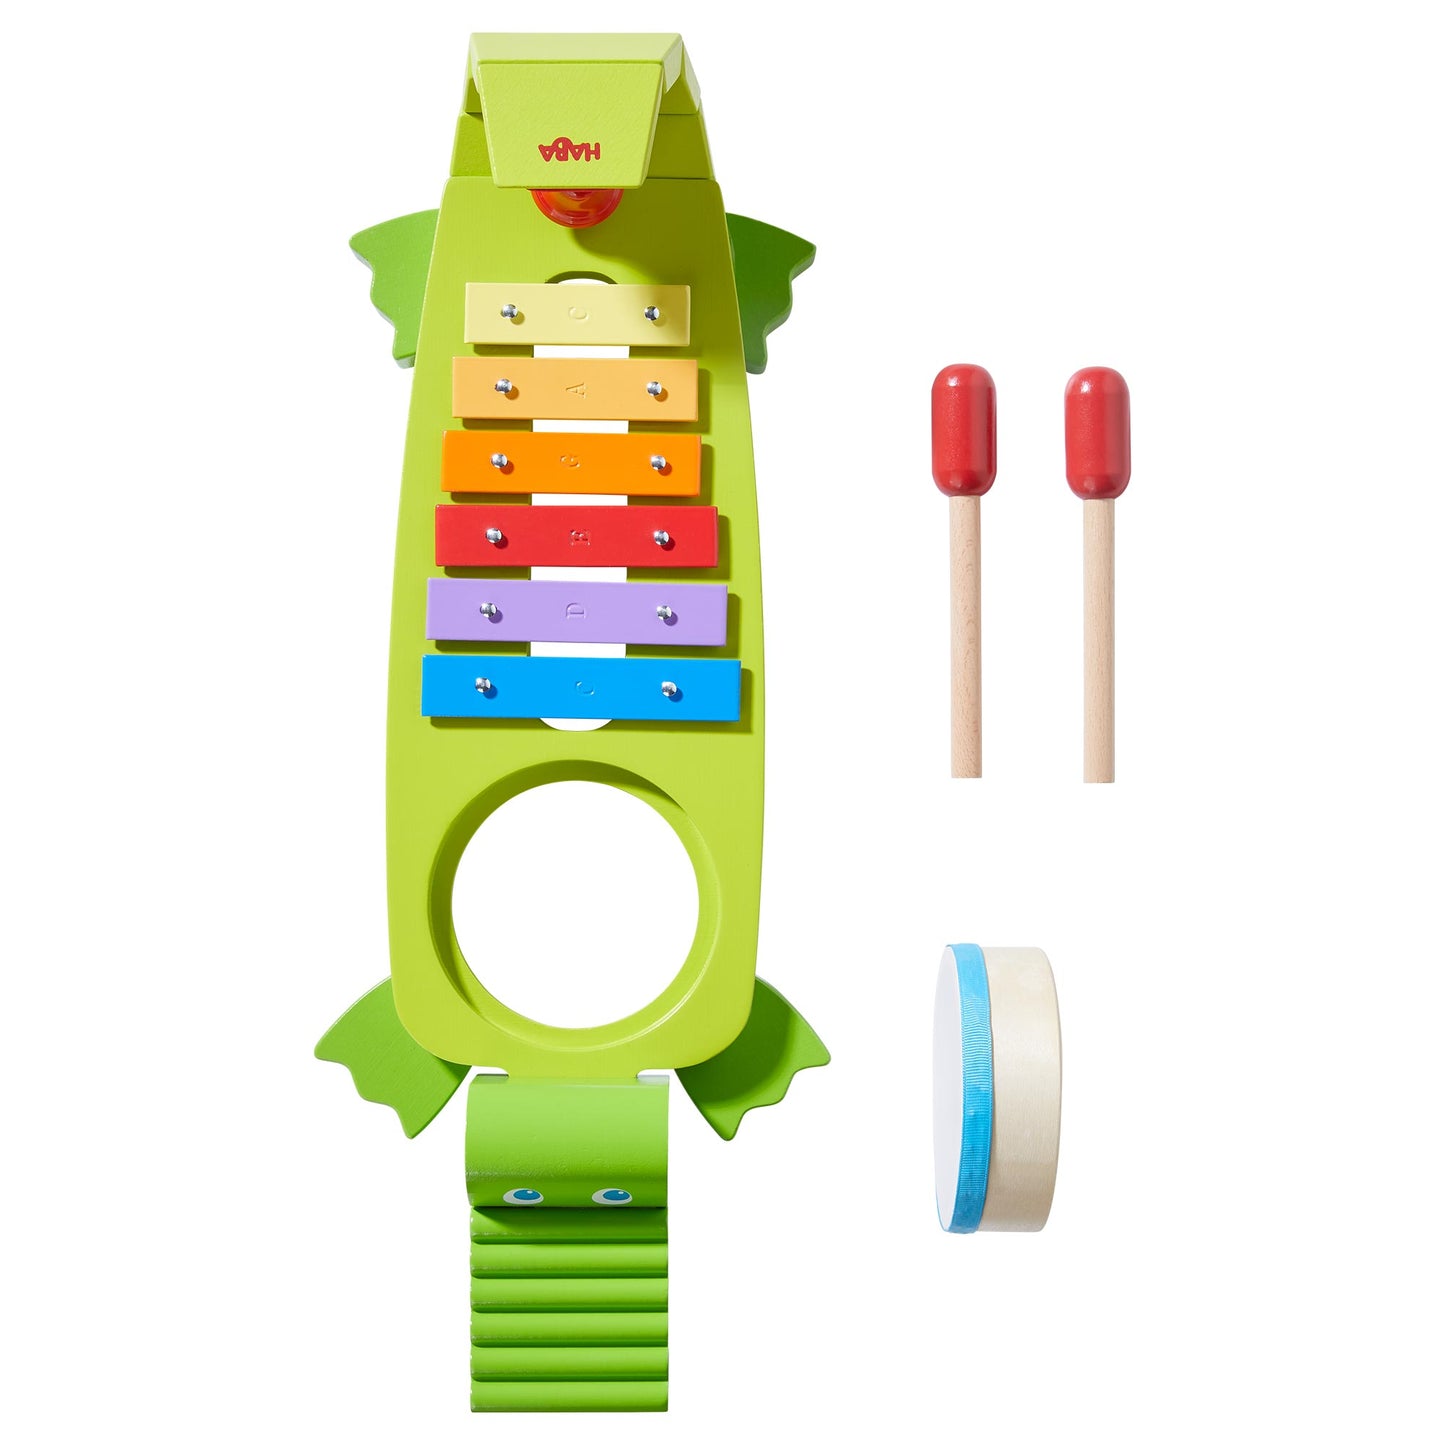 HABA Symphony Croc Colorful Wooden Musical Toy Set